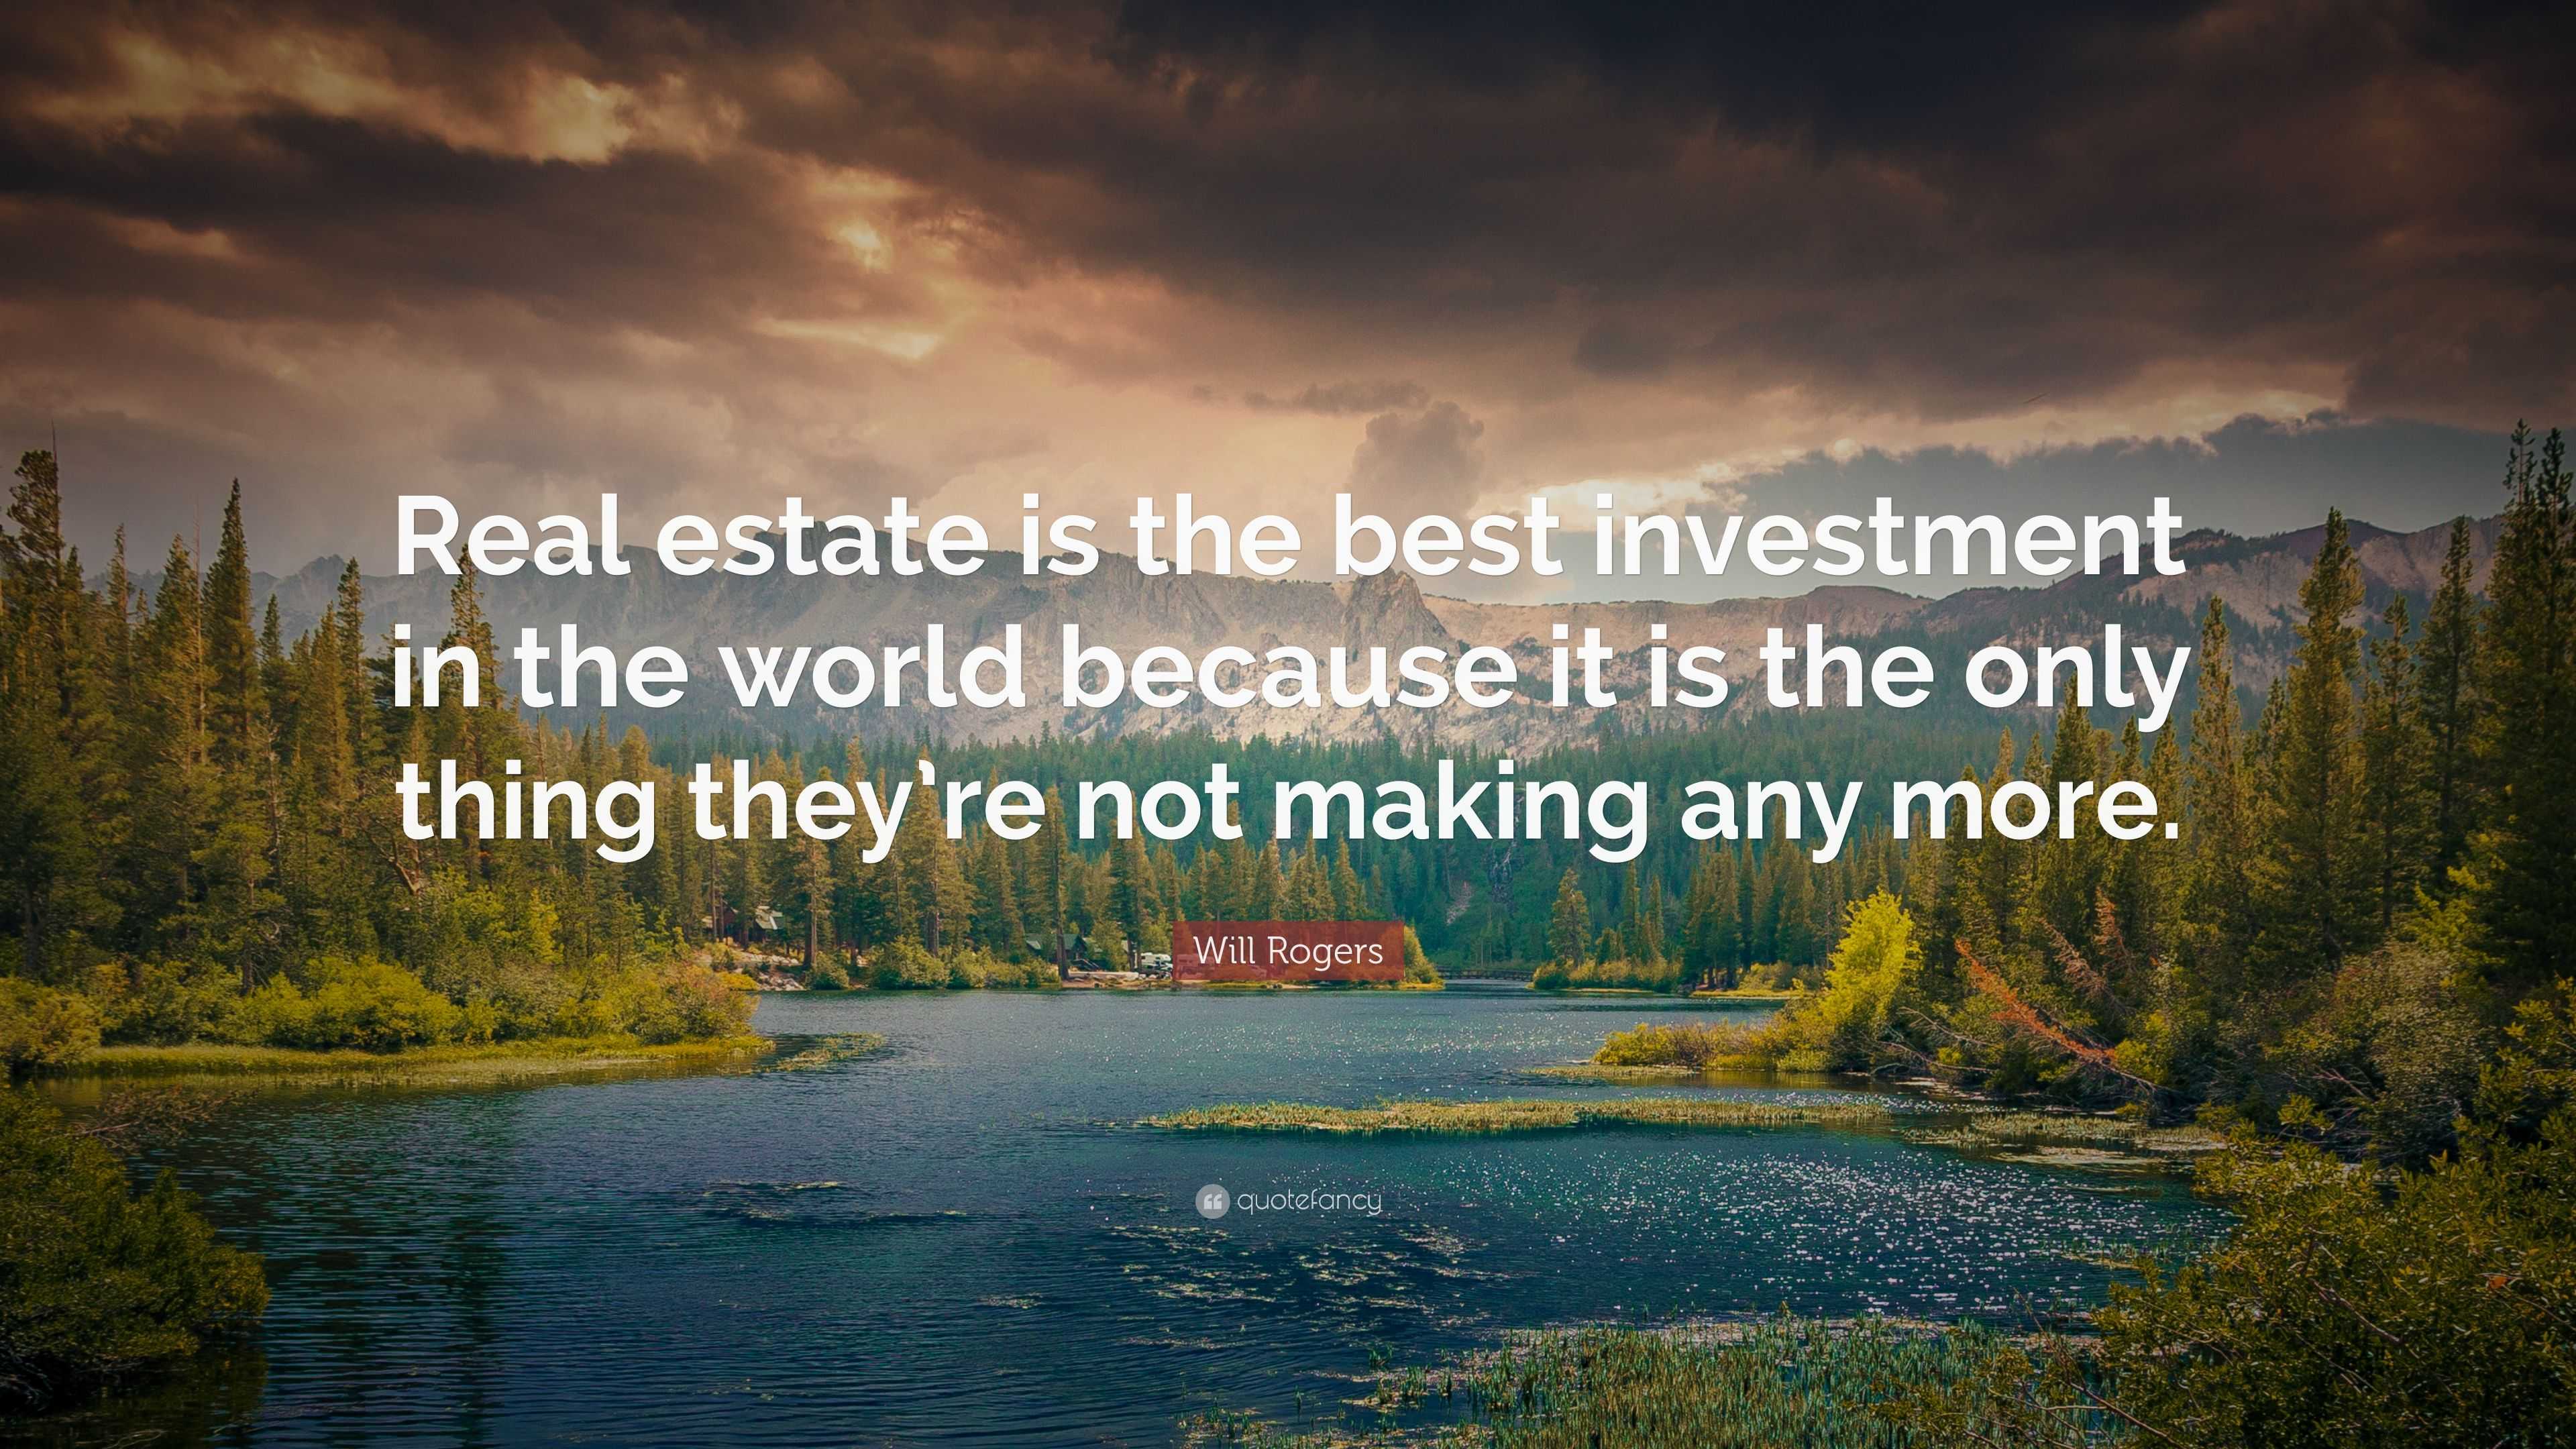 Will Rogers Quote “Real estate is the best investment in